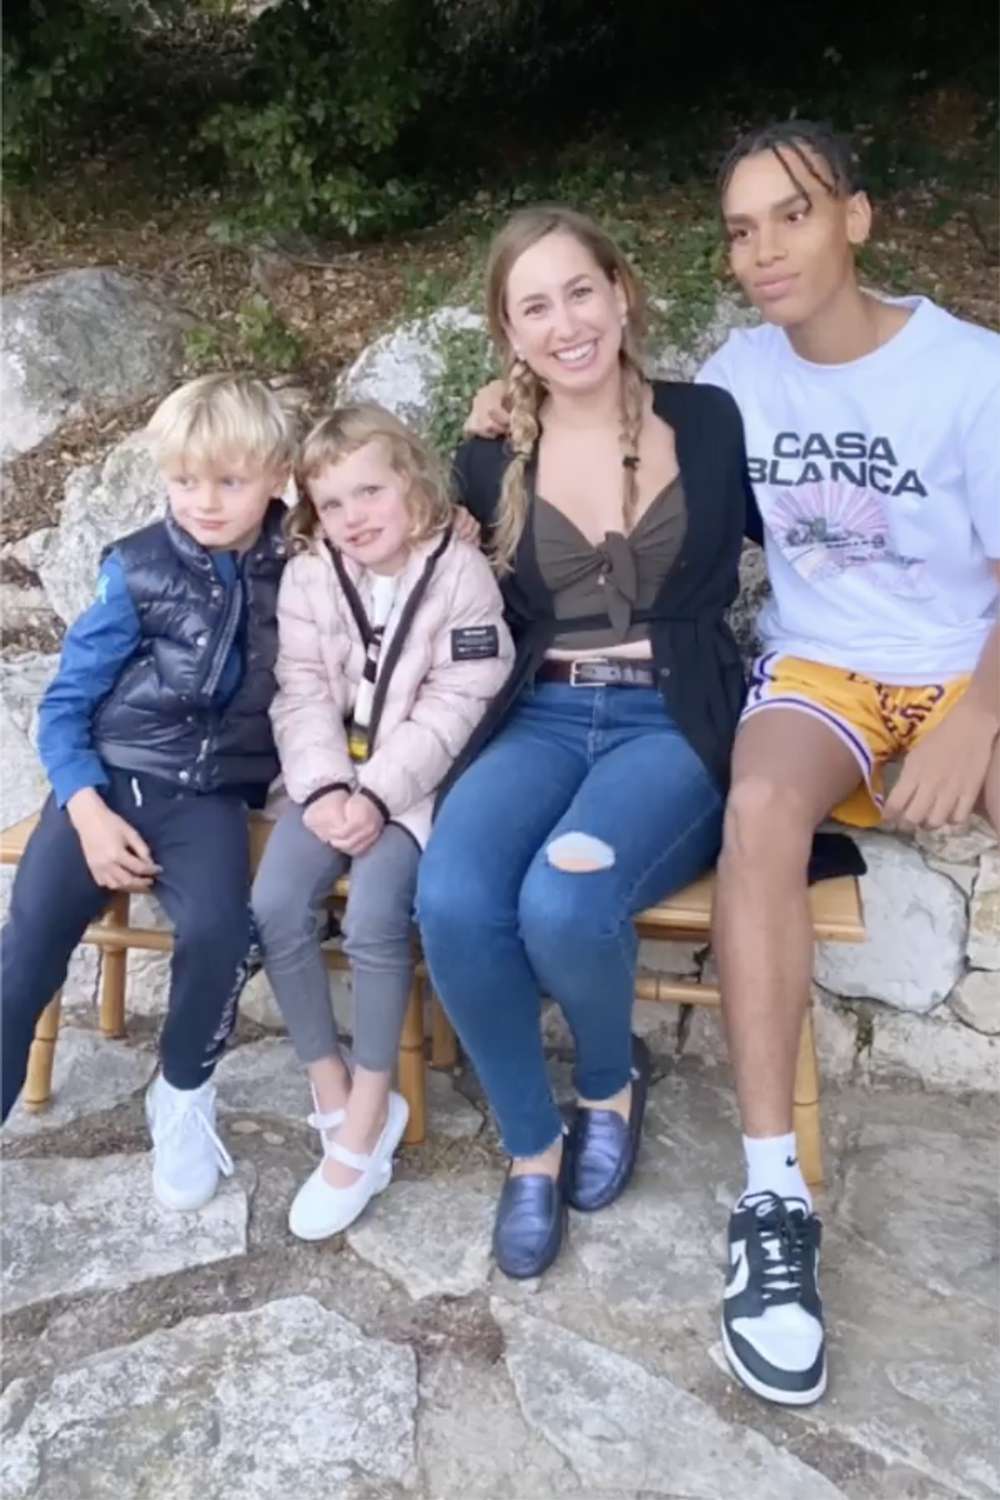 Prince Albert of Monaco's Four Children Appear in Their First Public Photo Together